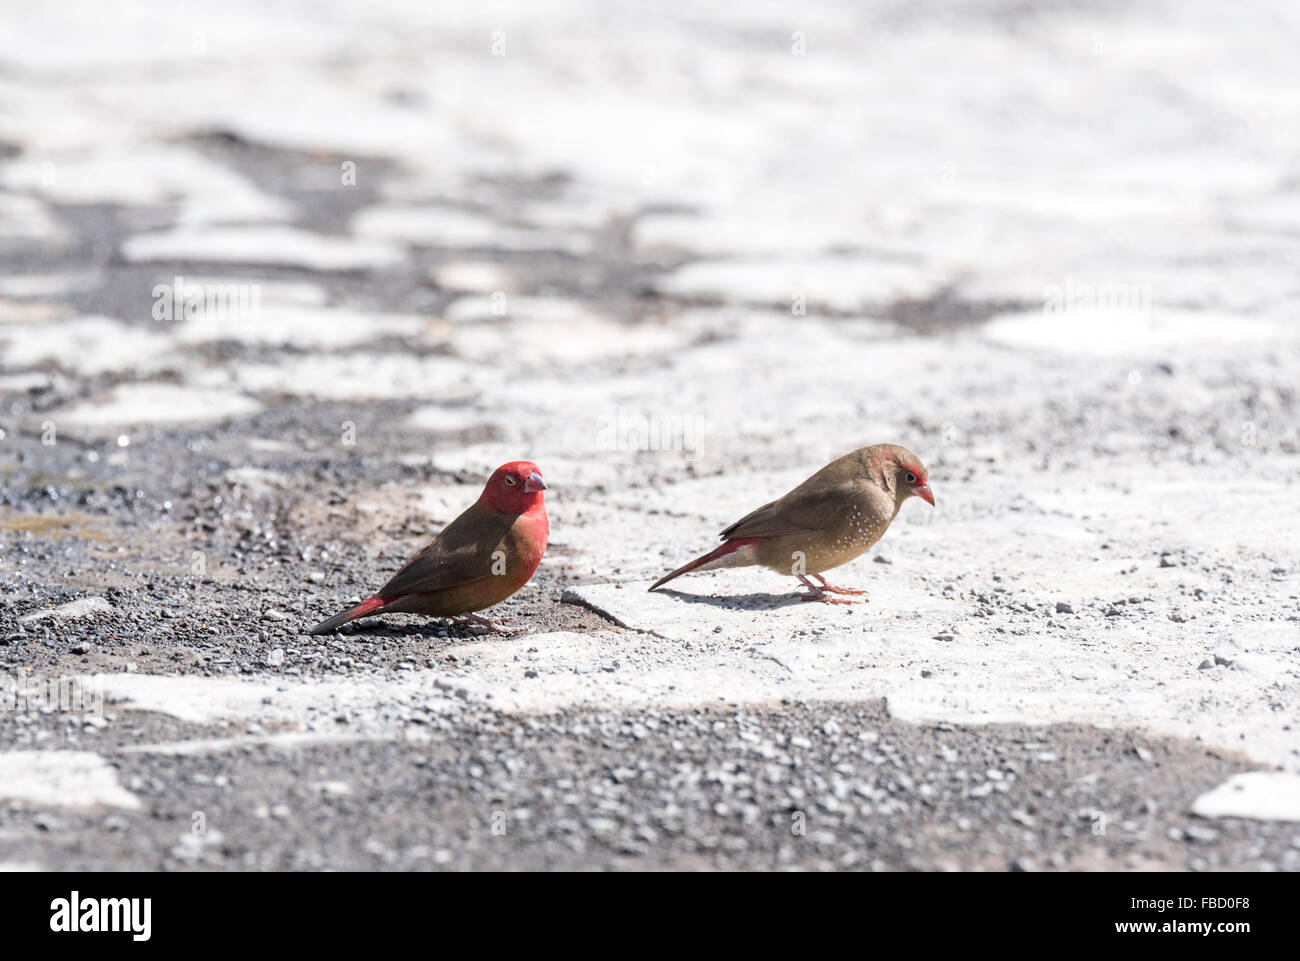 A pair of Red-billed Firefinchs feeding on the ground at Lake Ziway, Ethiopia Stock Photo